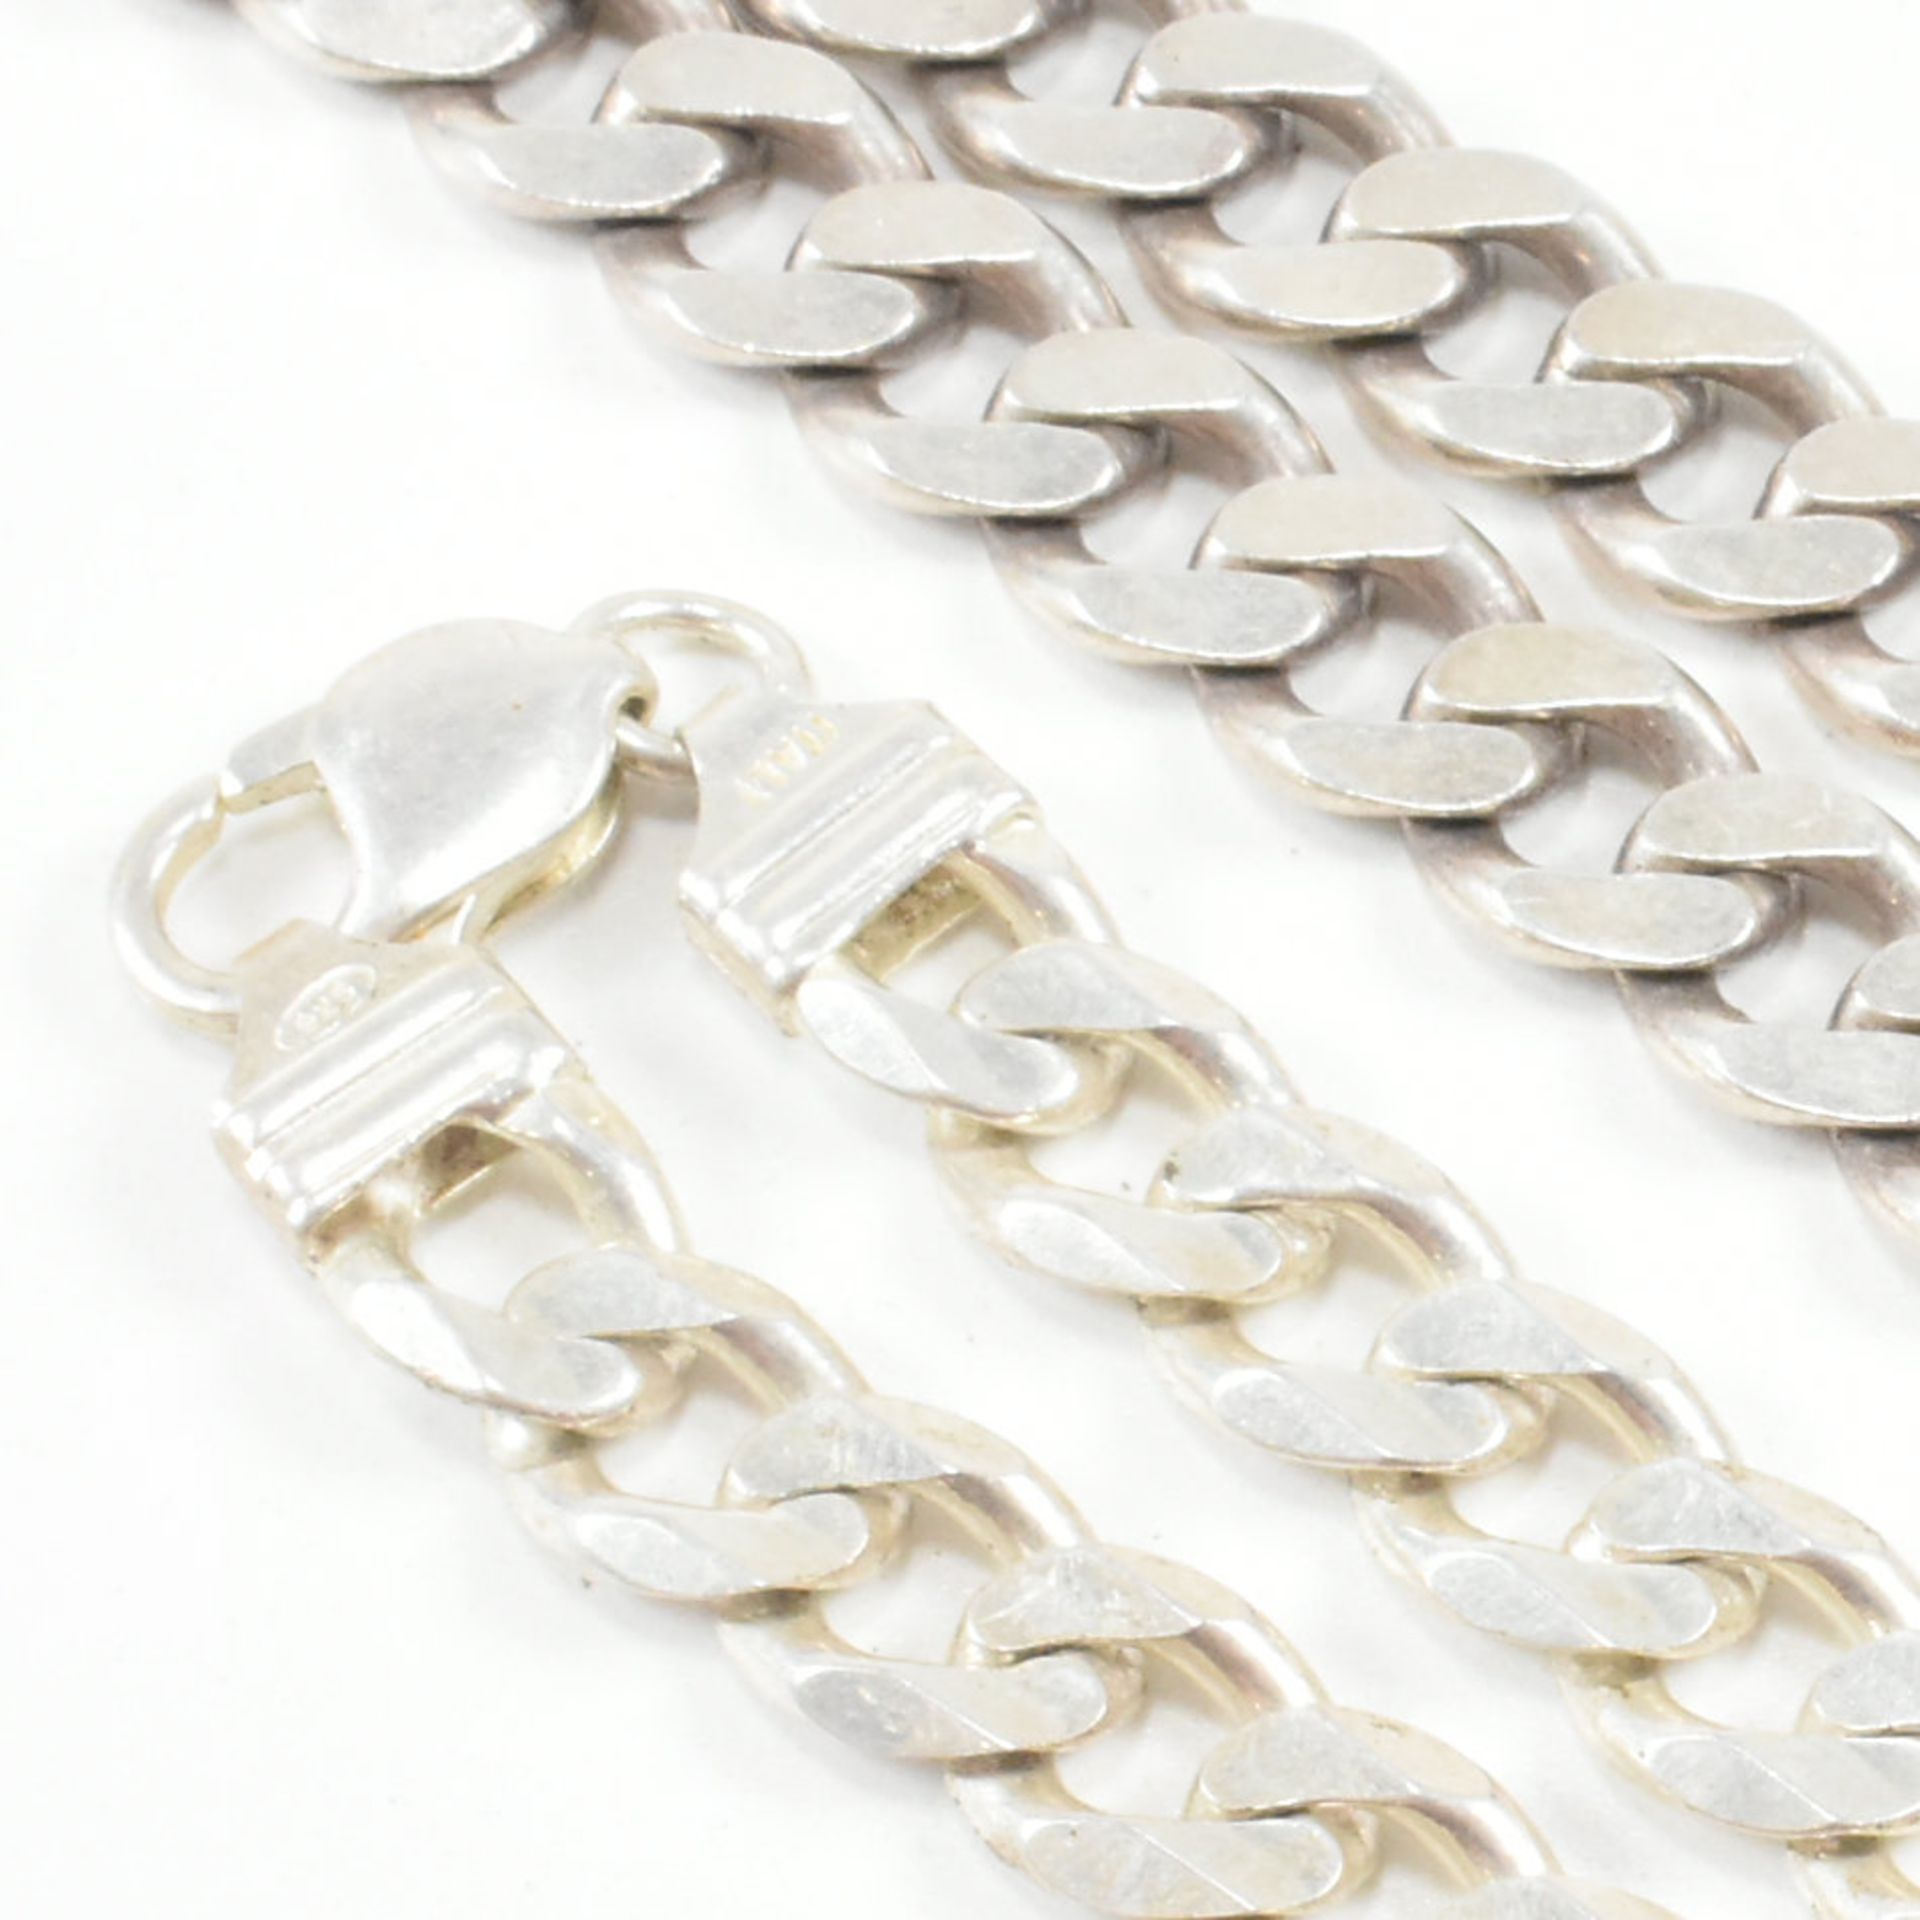 CONTEMPORARY ITALIAN 925 SILVER CURB LINK CHAIN & BRACELET - Image 3 of 7